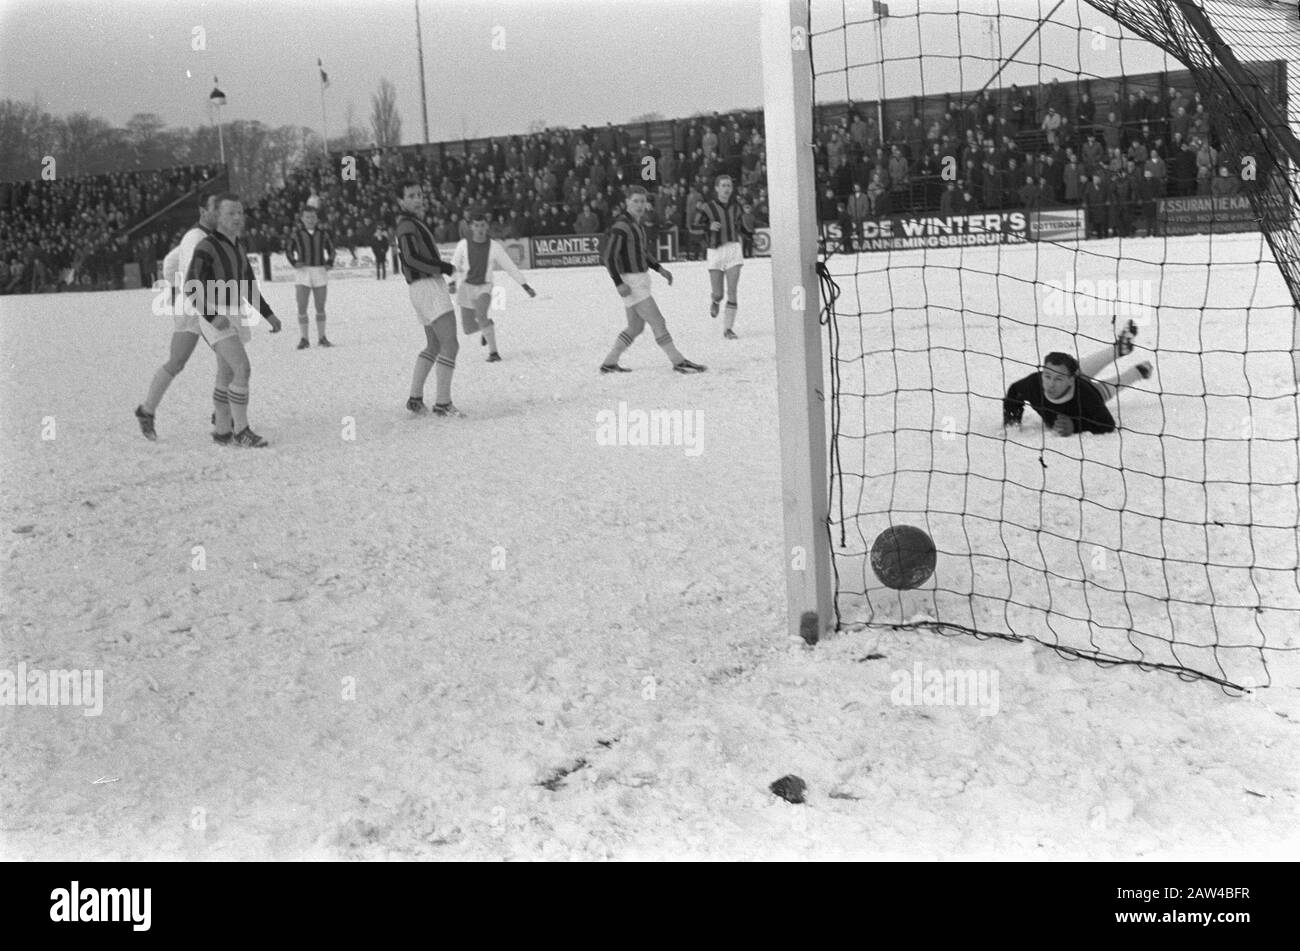 RCH against Ajax 5-2. The Ajax youth player Crist scored, goalkeeper Van der Shields beaten Date: February 17, 1963 Keywords: goalkeepers Institution Name: AJAX Stock Photo